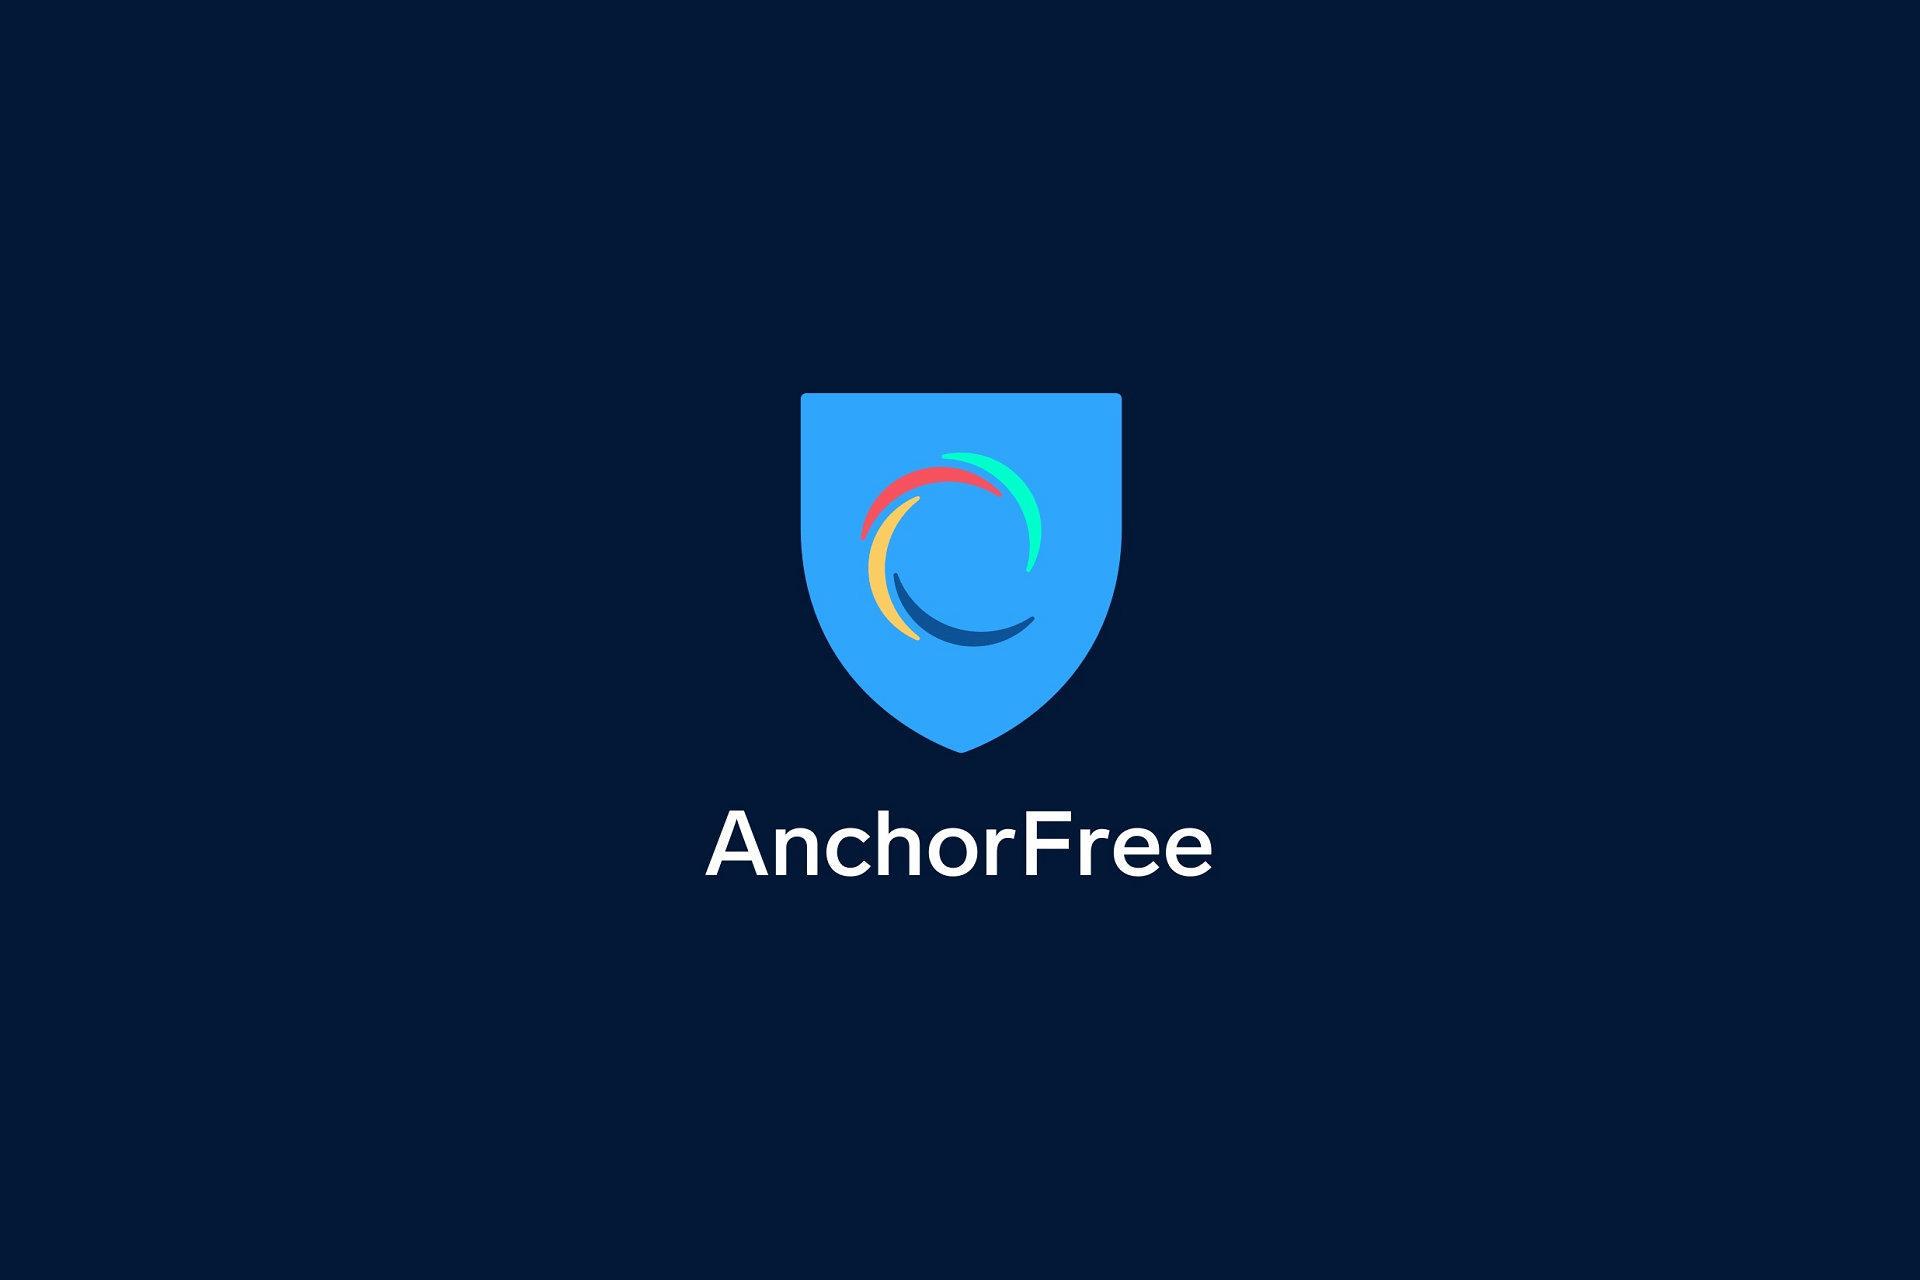 AnchorFree the maker of Hotspot Shield